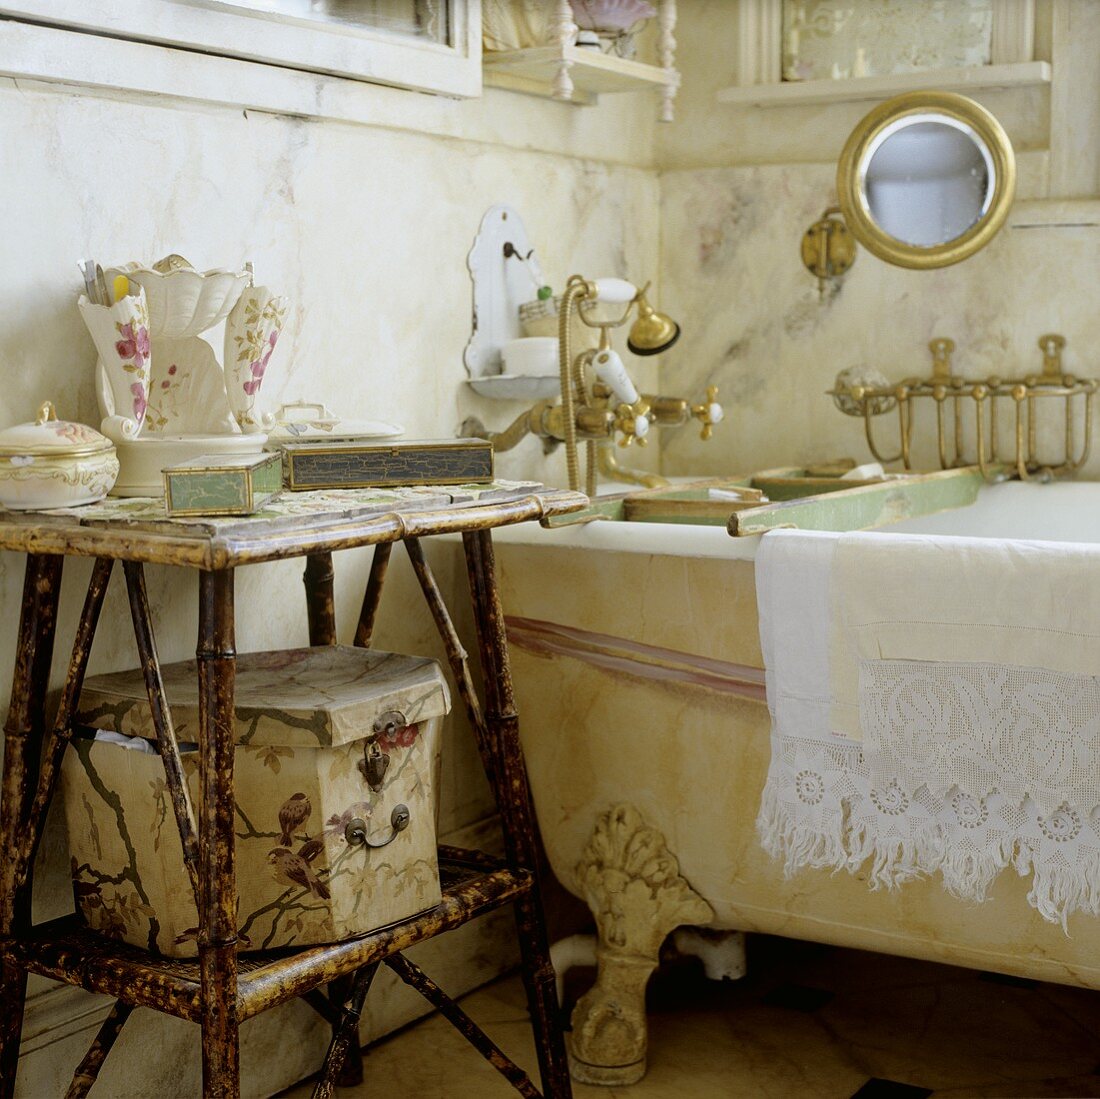 Bathing utensils on a wicker side table next to an antique bathtub with feet and brass taps